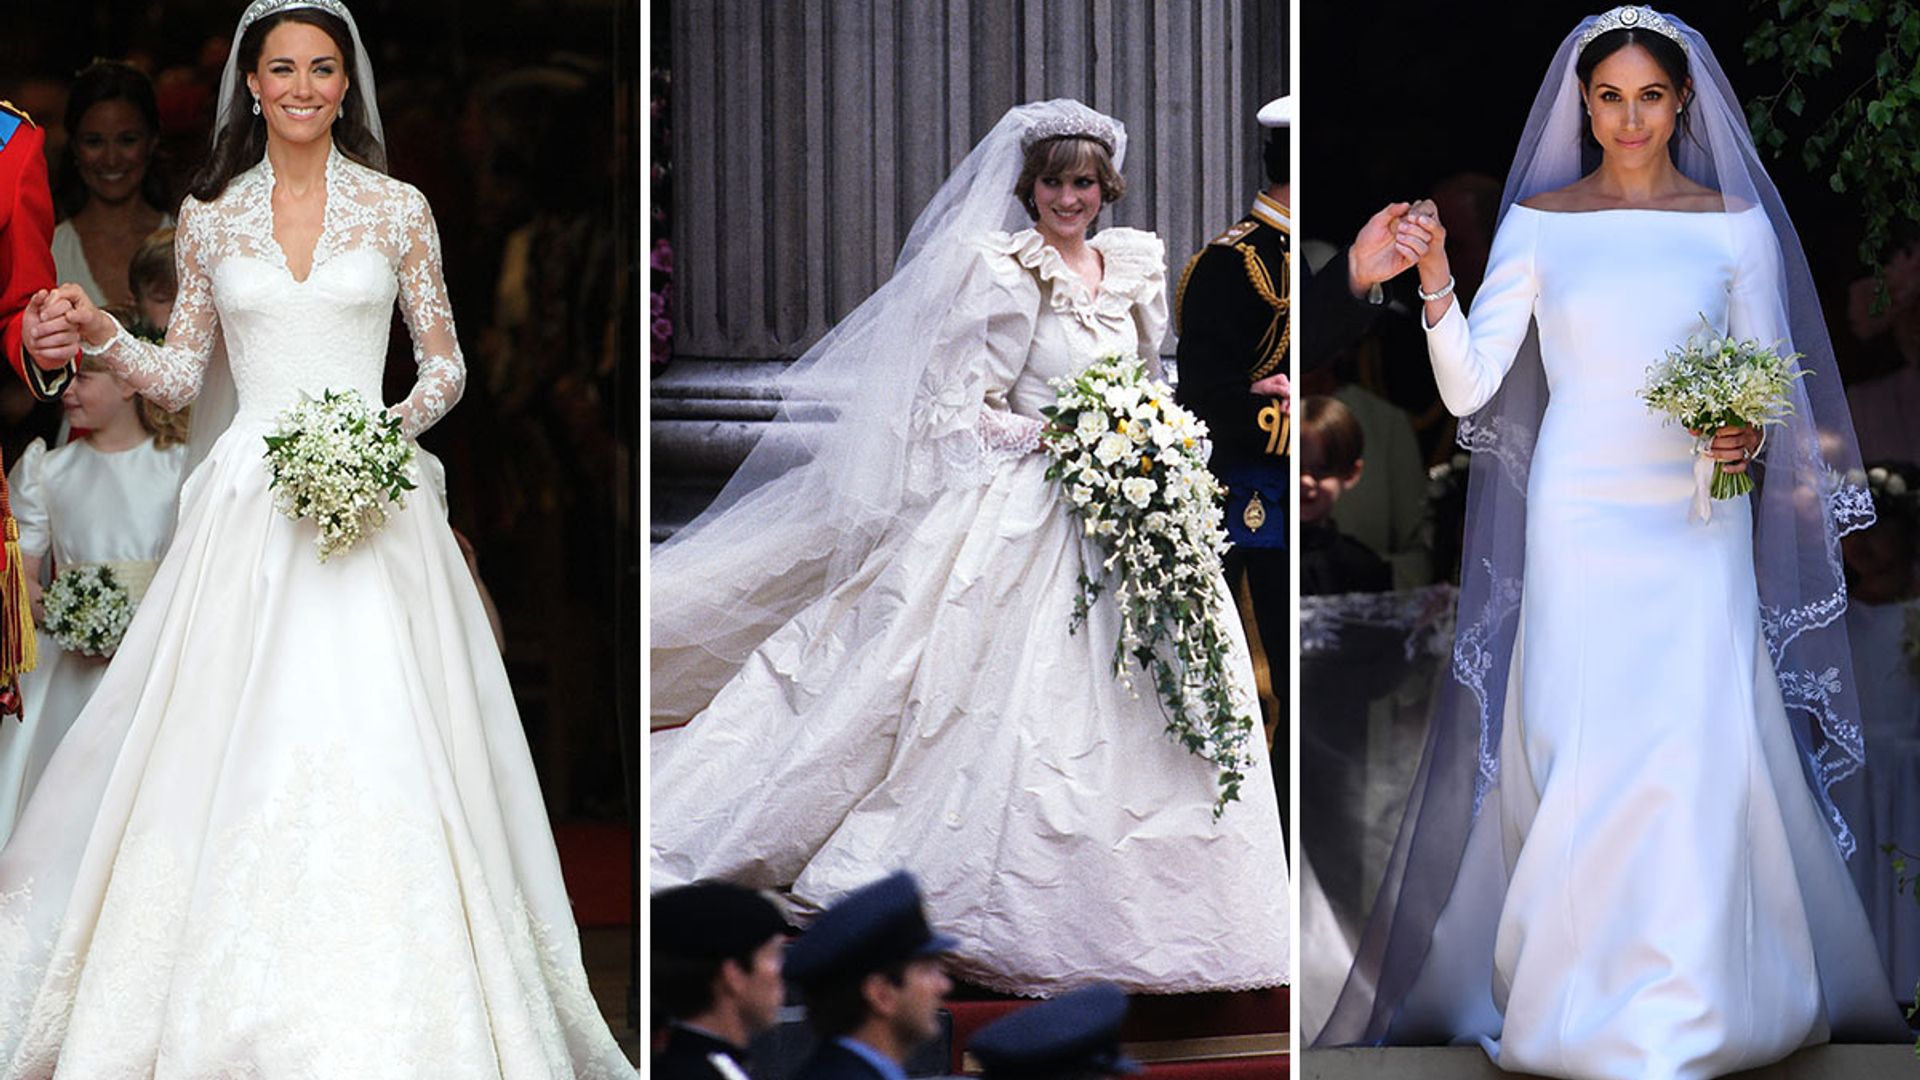 WATCH: The most amazing royal wedding dresses in history